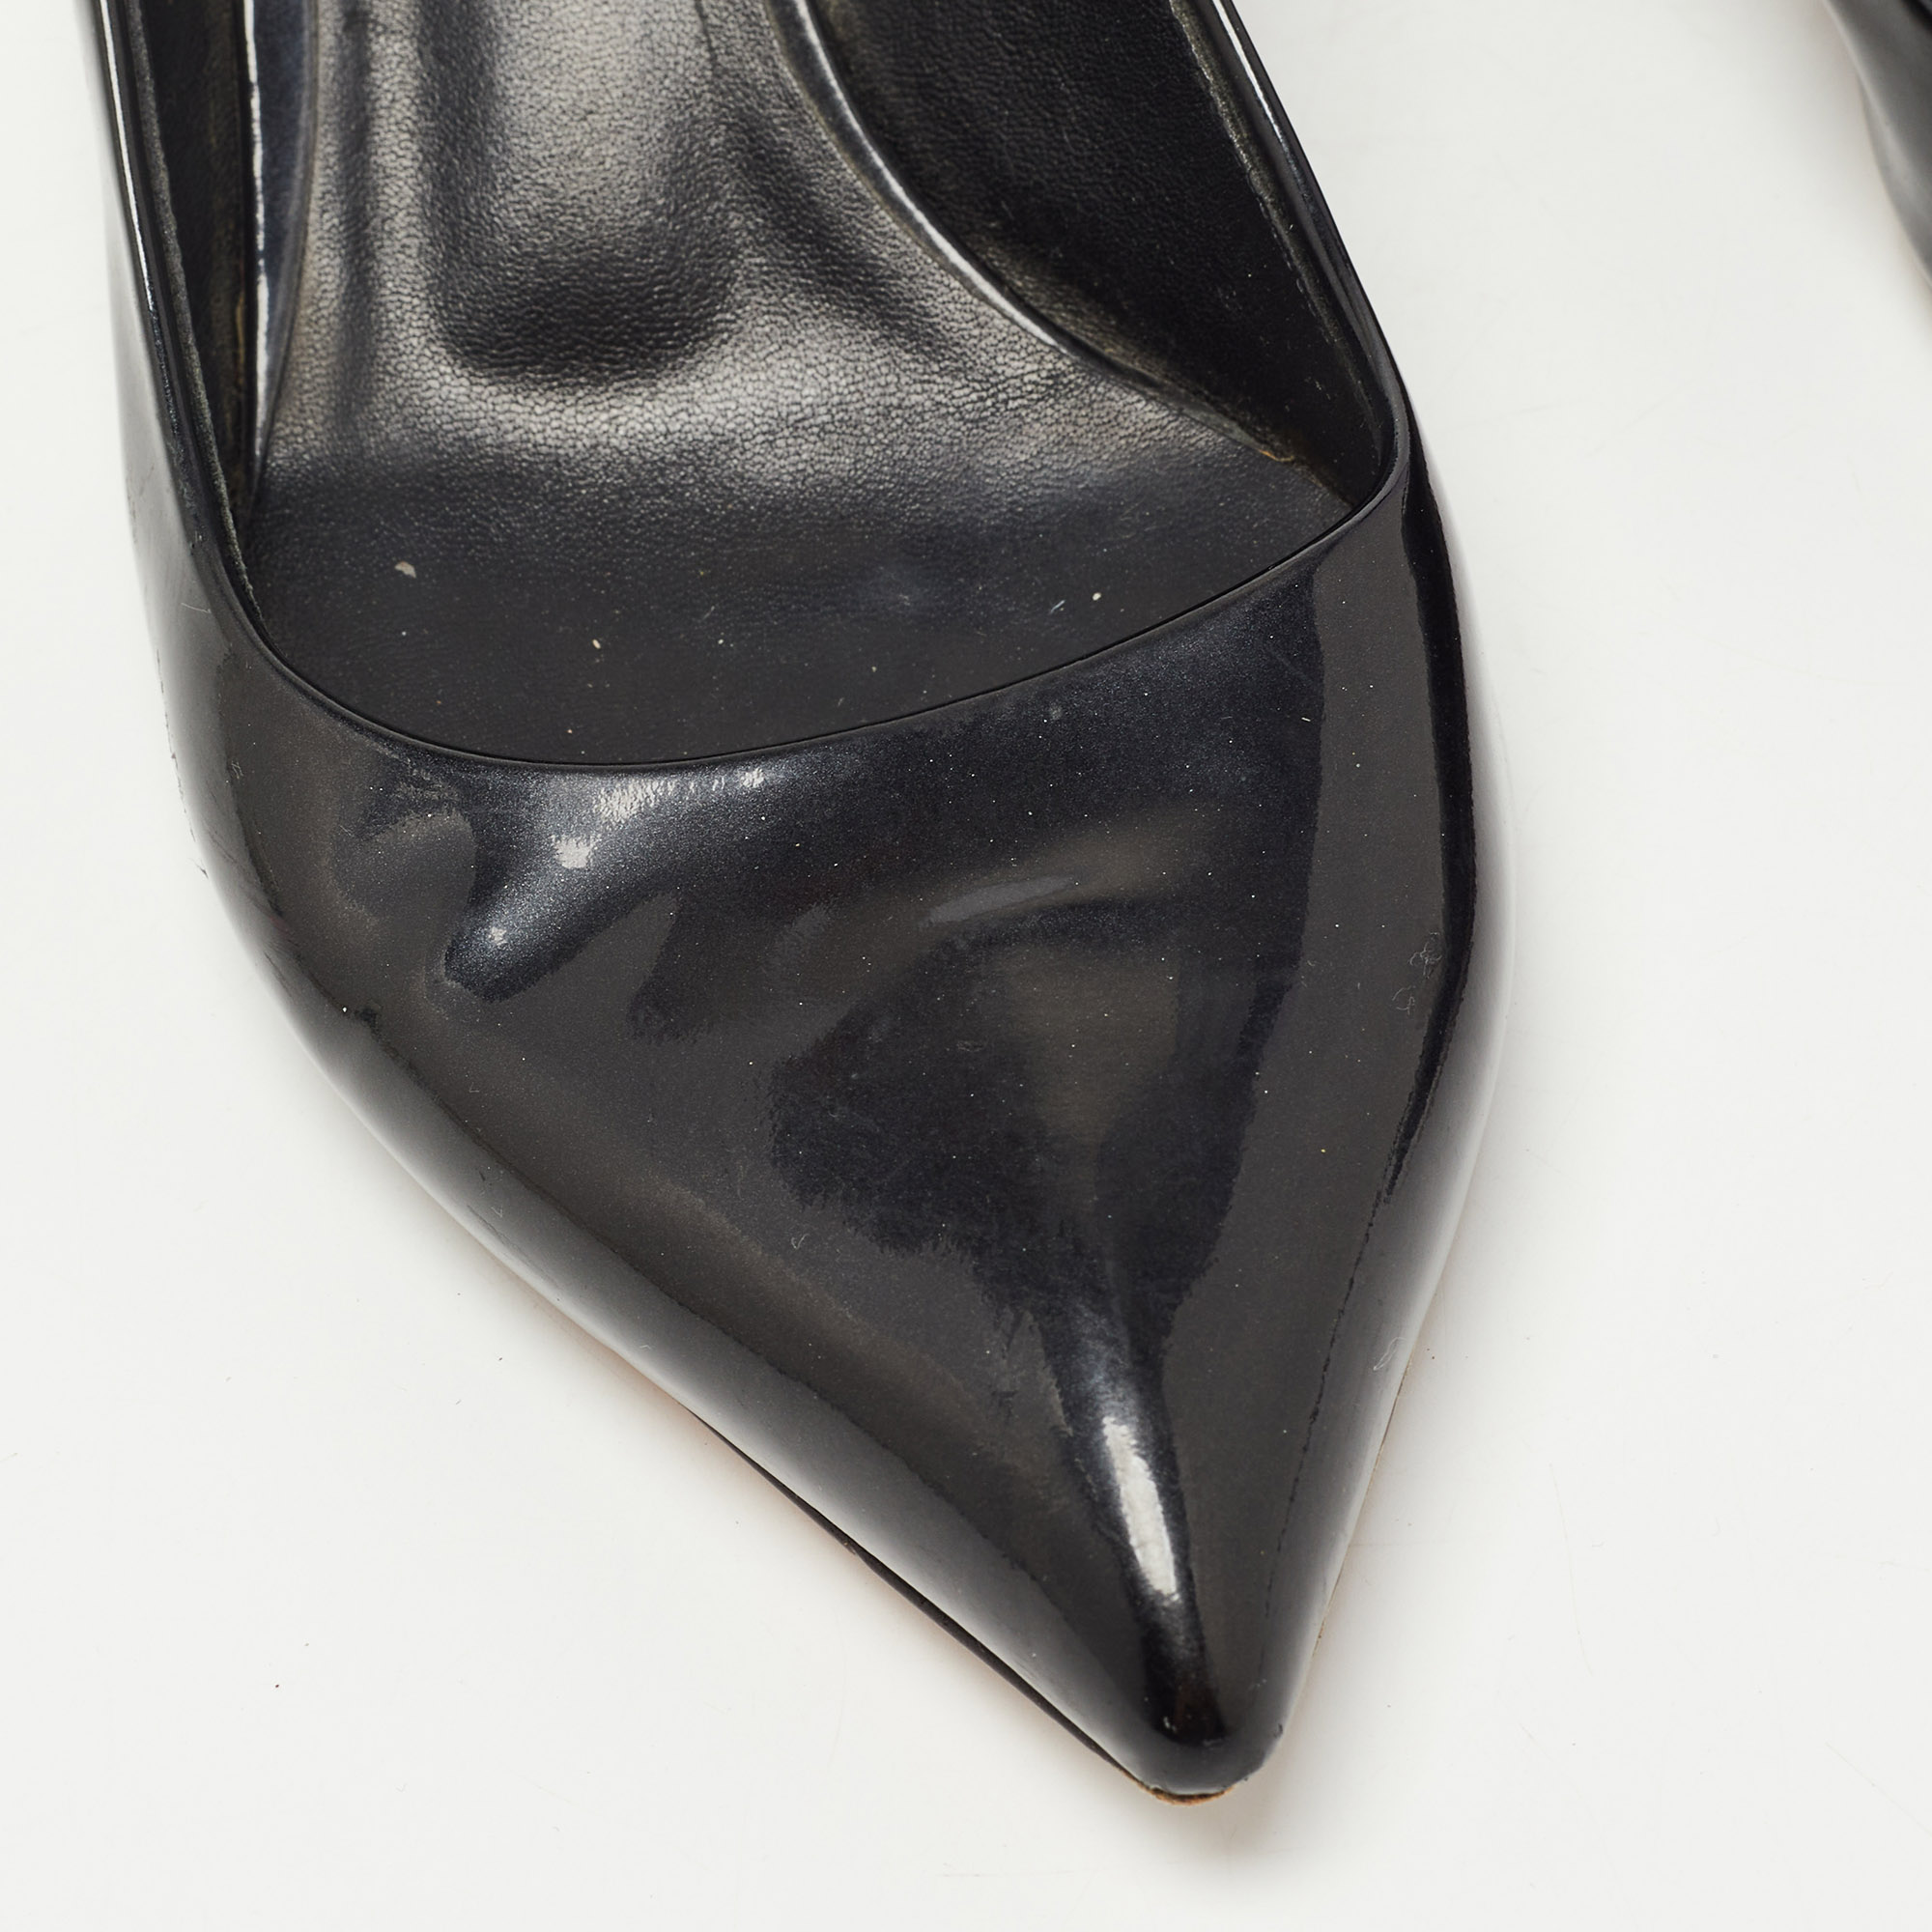 Casadei Black Patent Leather Pointed Toe Pumps Size 37.5